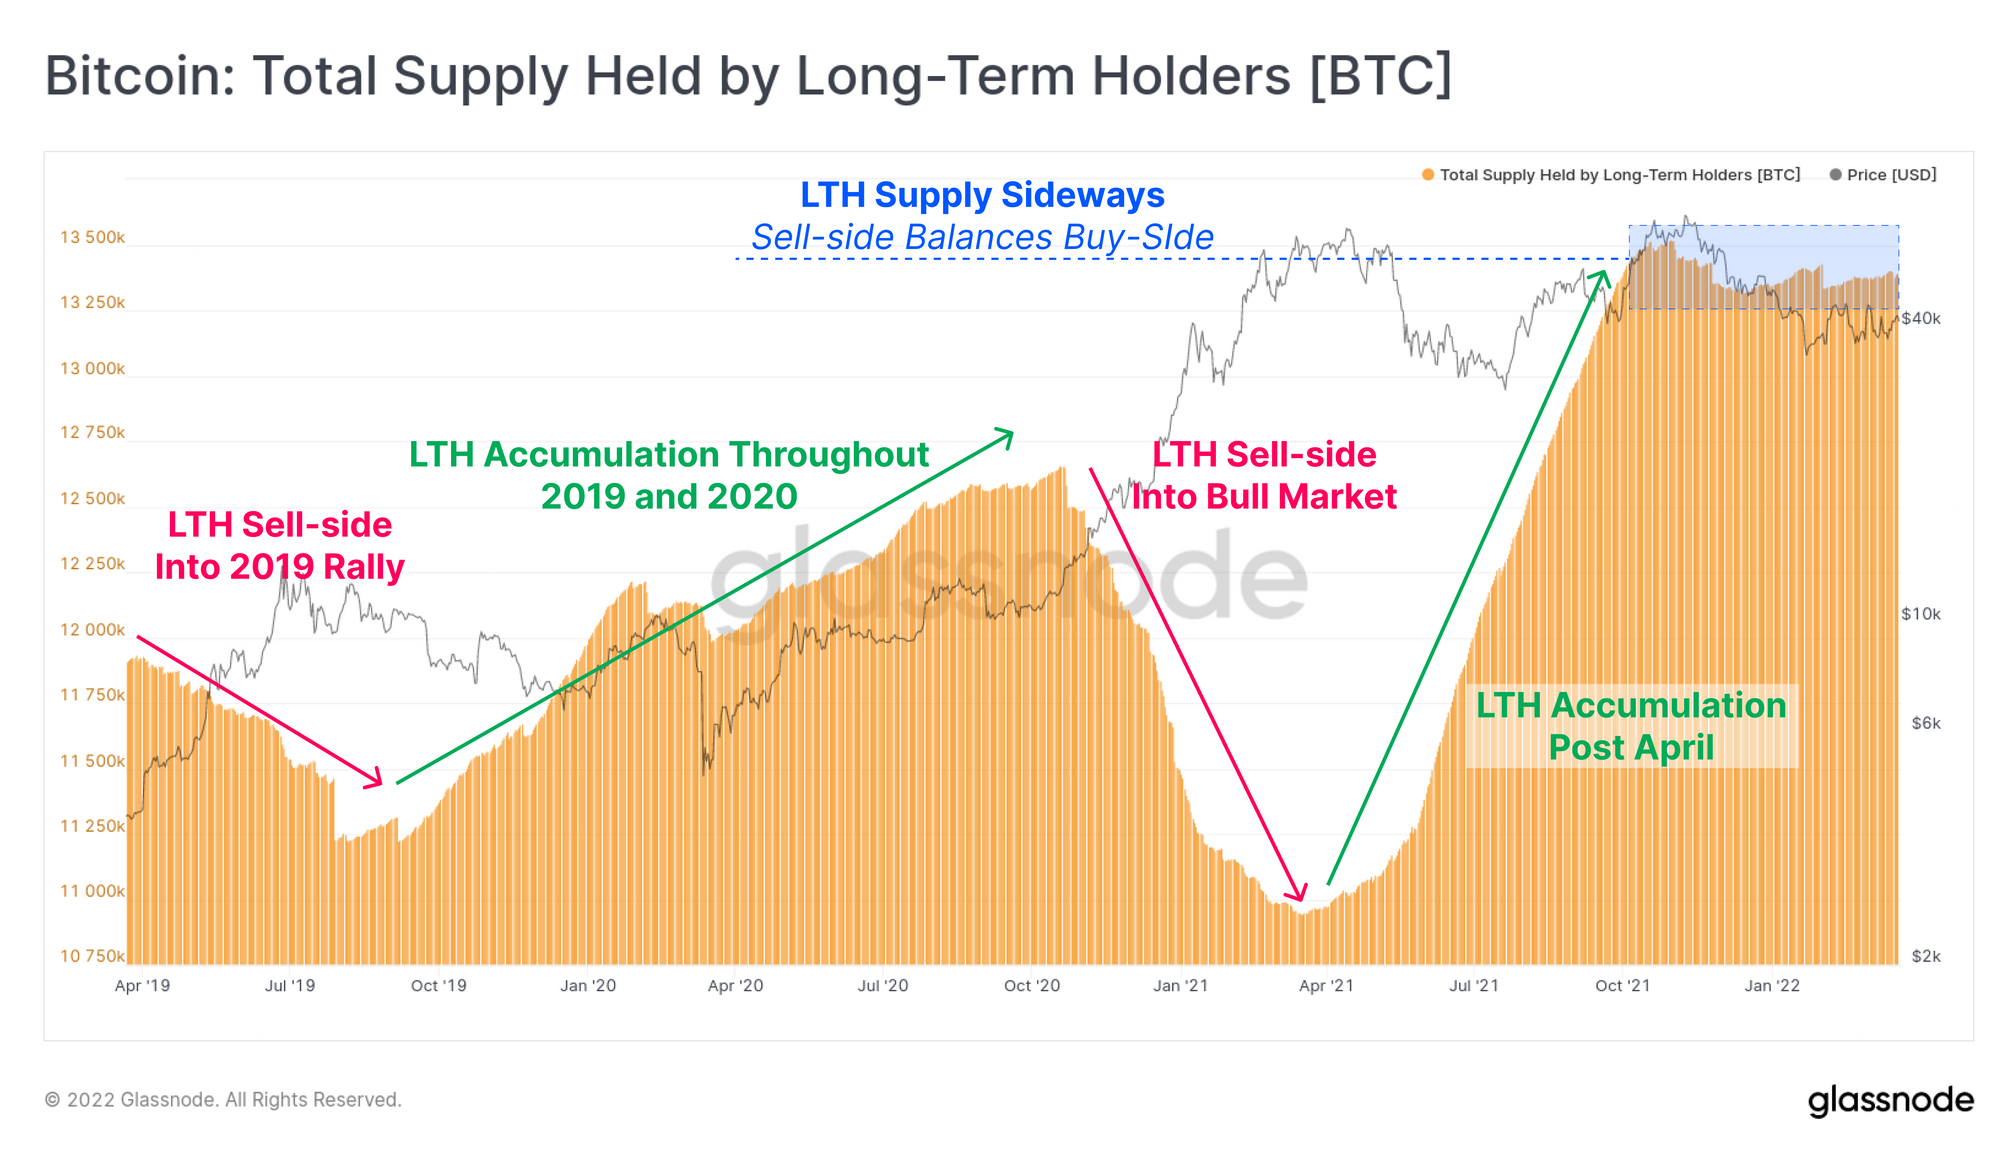 Data: Bitcoin Long-Term Holder Supply Has Stagnated Since October High